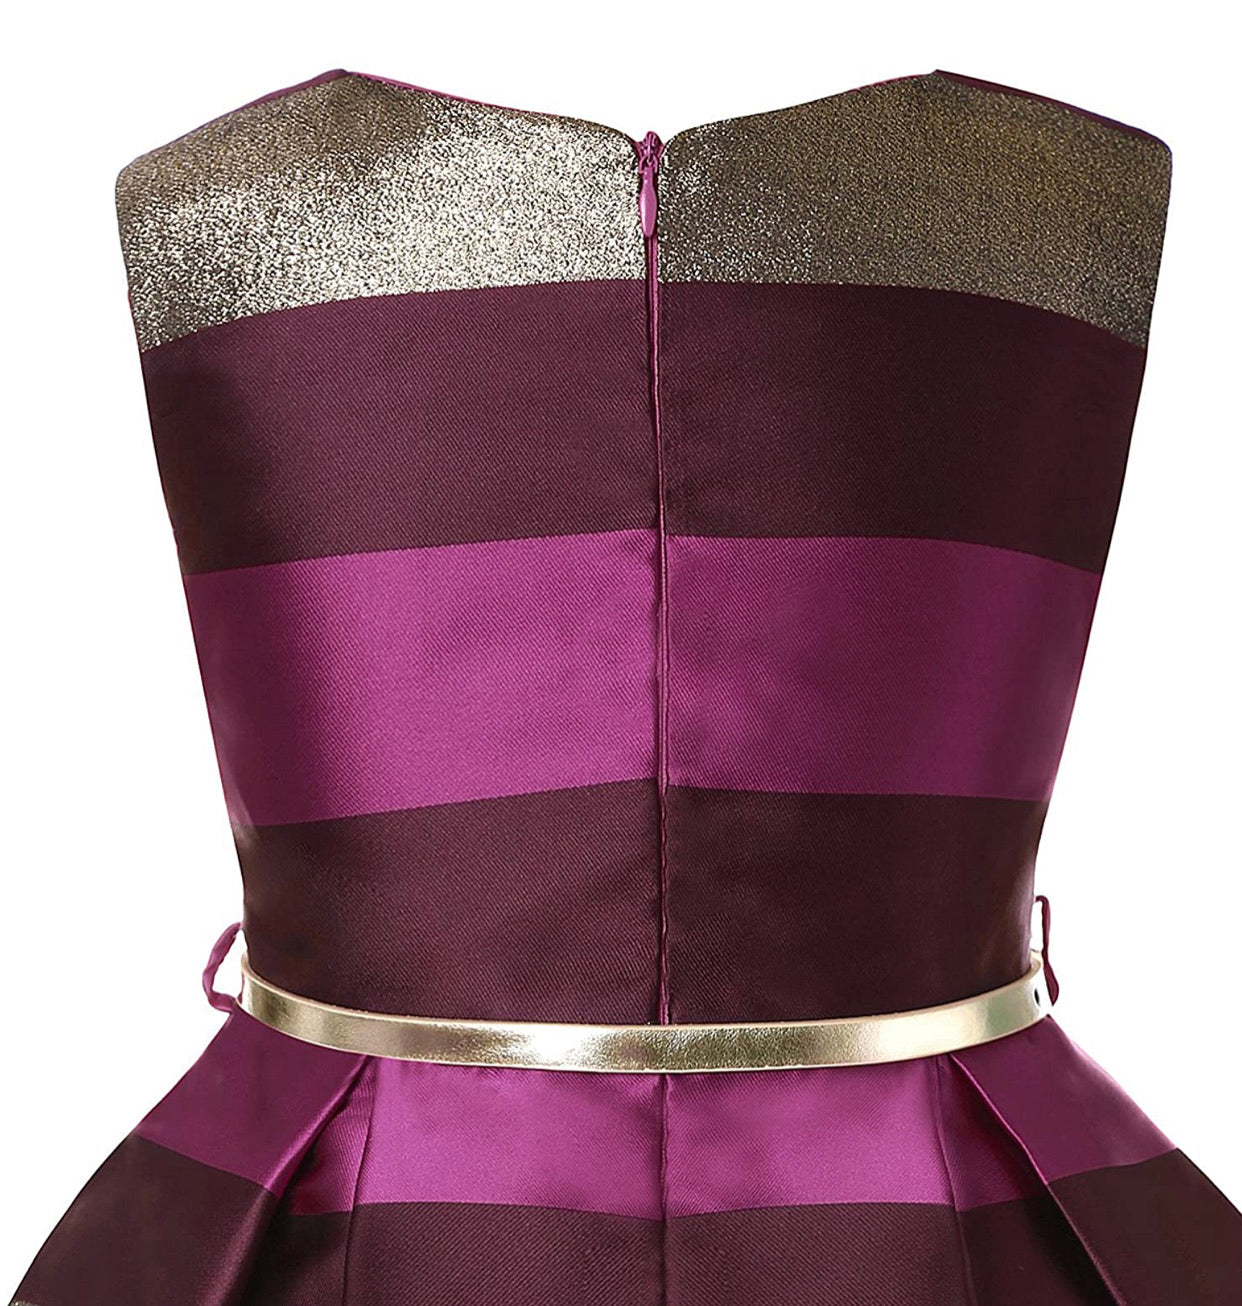 Little girl’s gold, magenta, and burgundy Striped Party Dress, Sizes 2T - 14 years